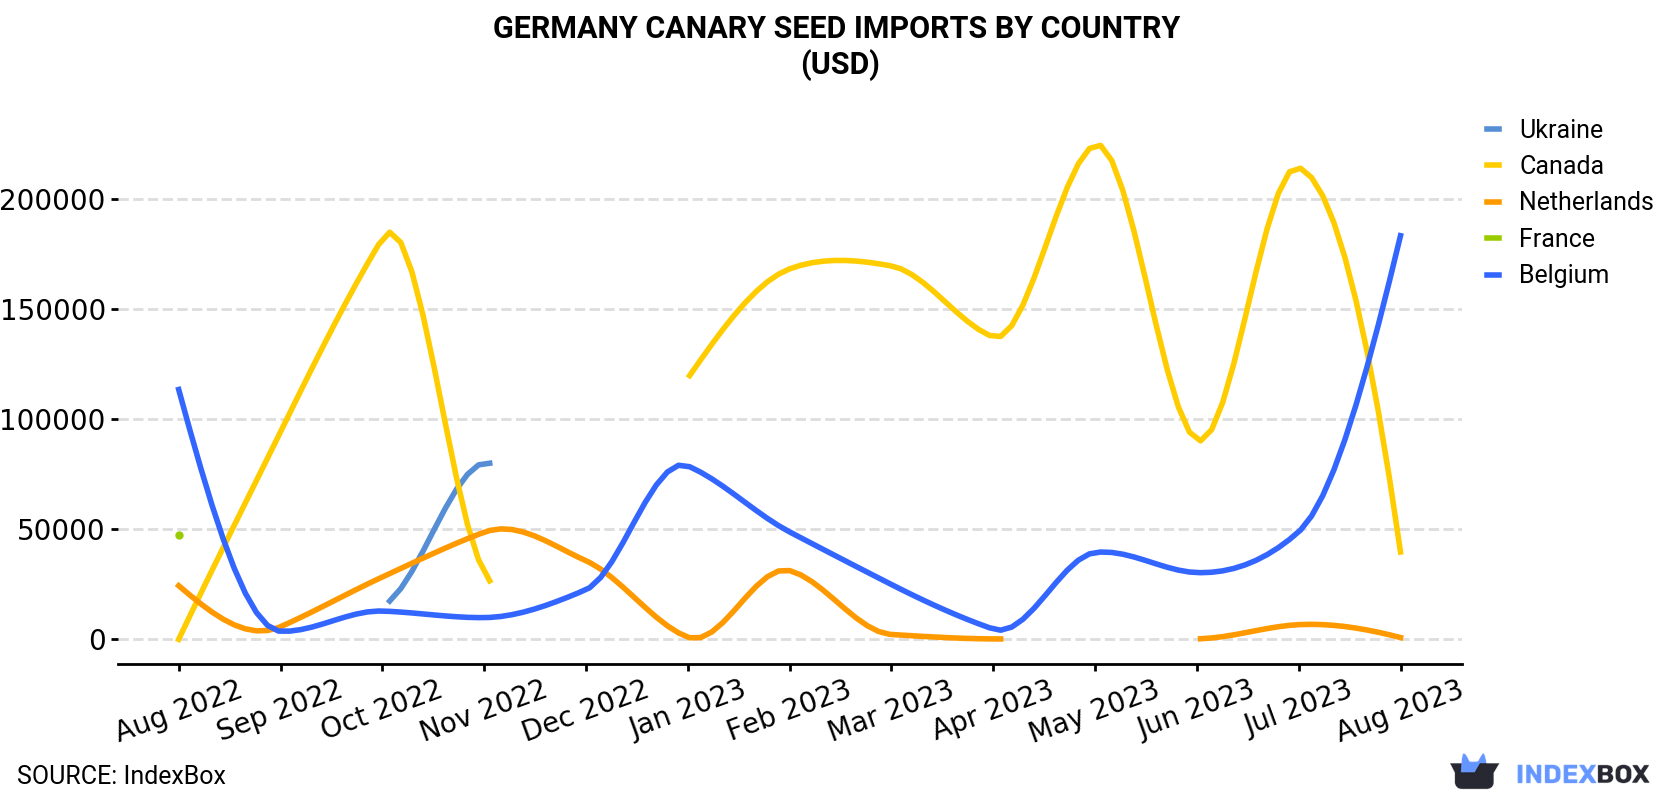 Germany Canary Seed Imports By Country (USD)